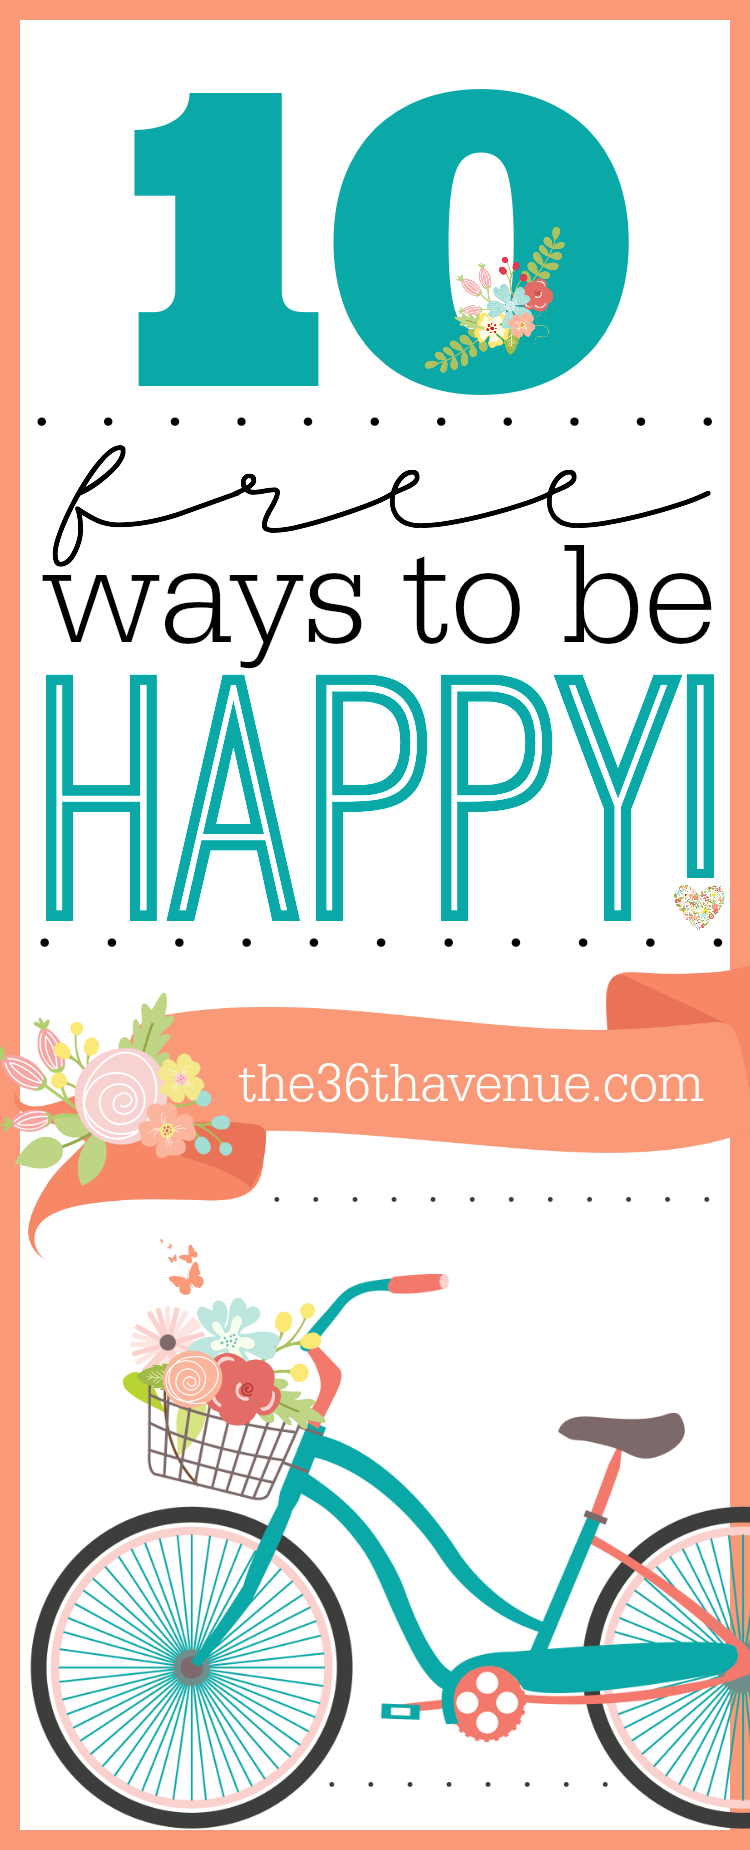 10 Free Ways to Be Happy at the36thavenue.com